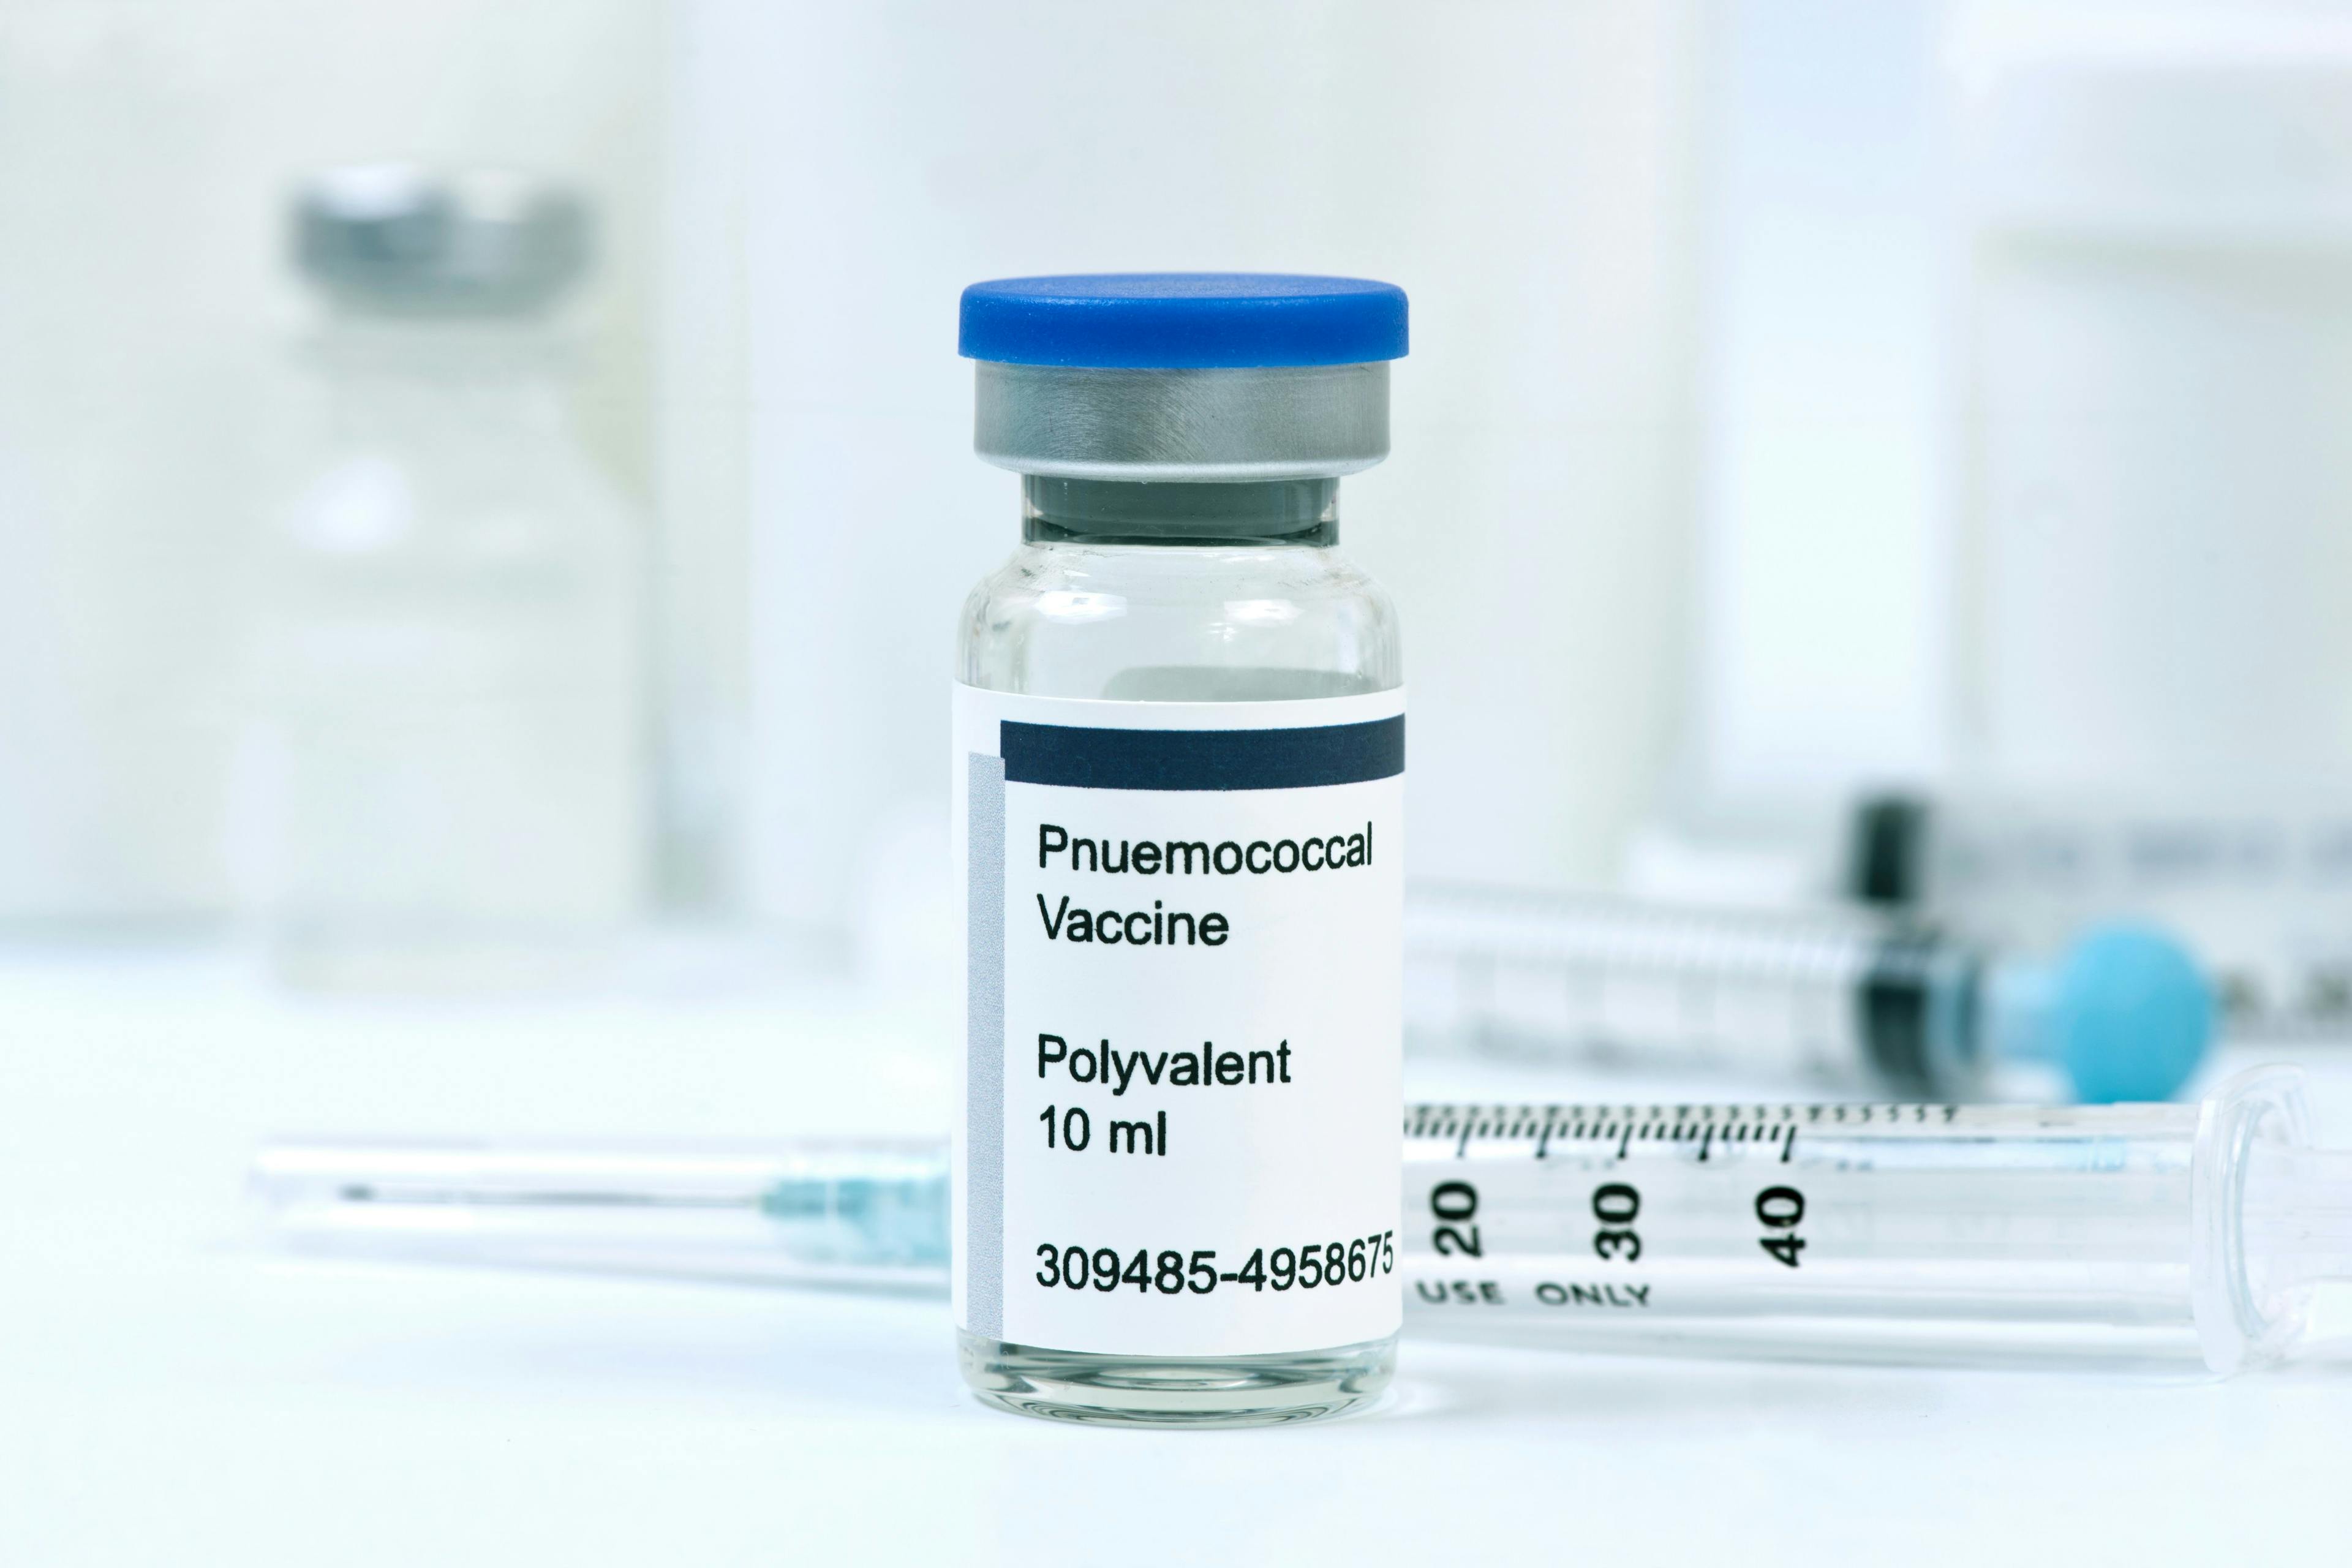 Pneumococcal Vaccine | Image Credit: Sherry Young - stock.adobe.com